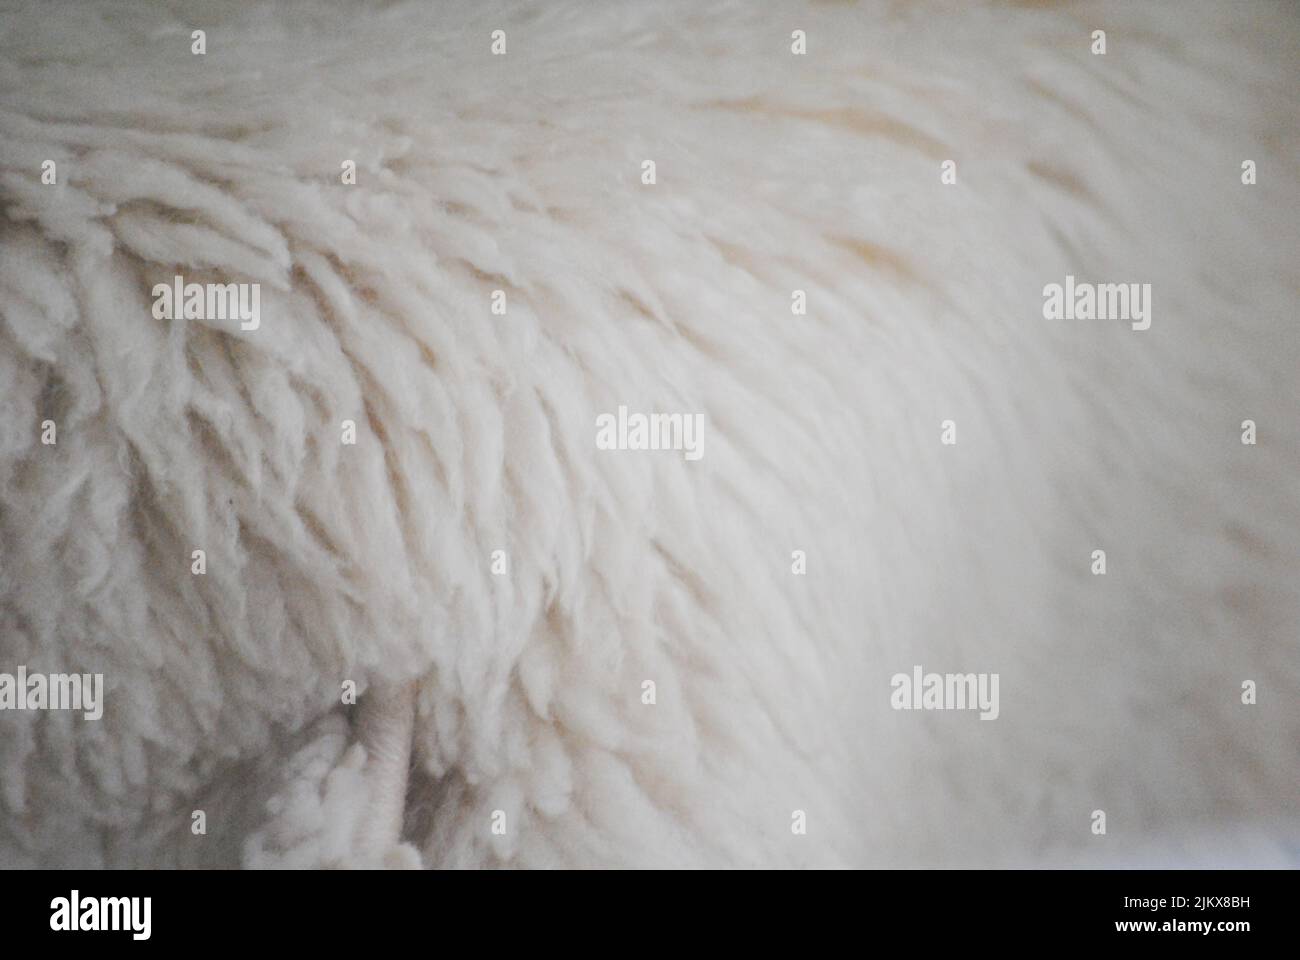 leather with white sheep wool to decorate interiors Stock Photo